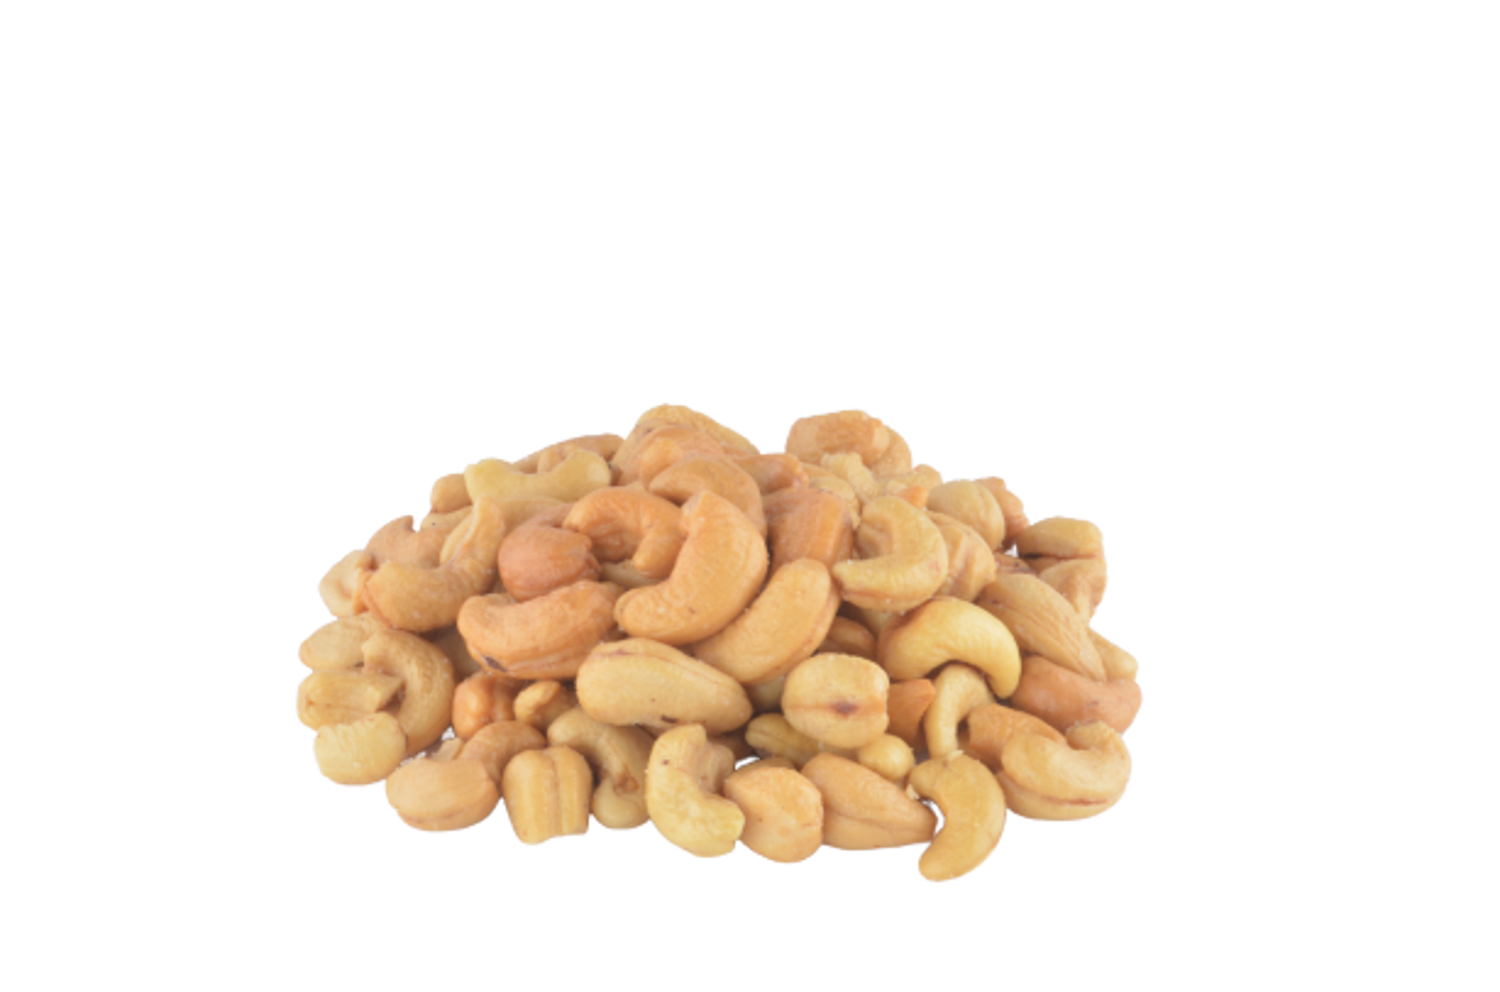 Picture of MEVLANA CASHEWS NUTS ROASTED